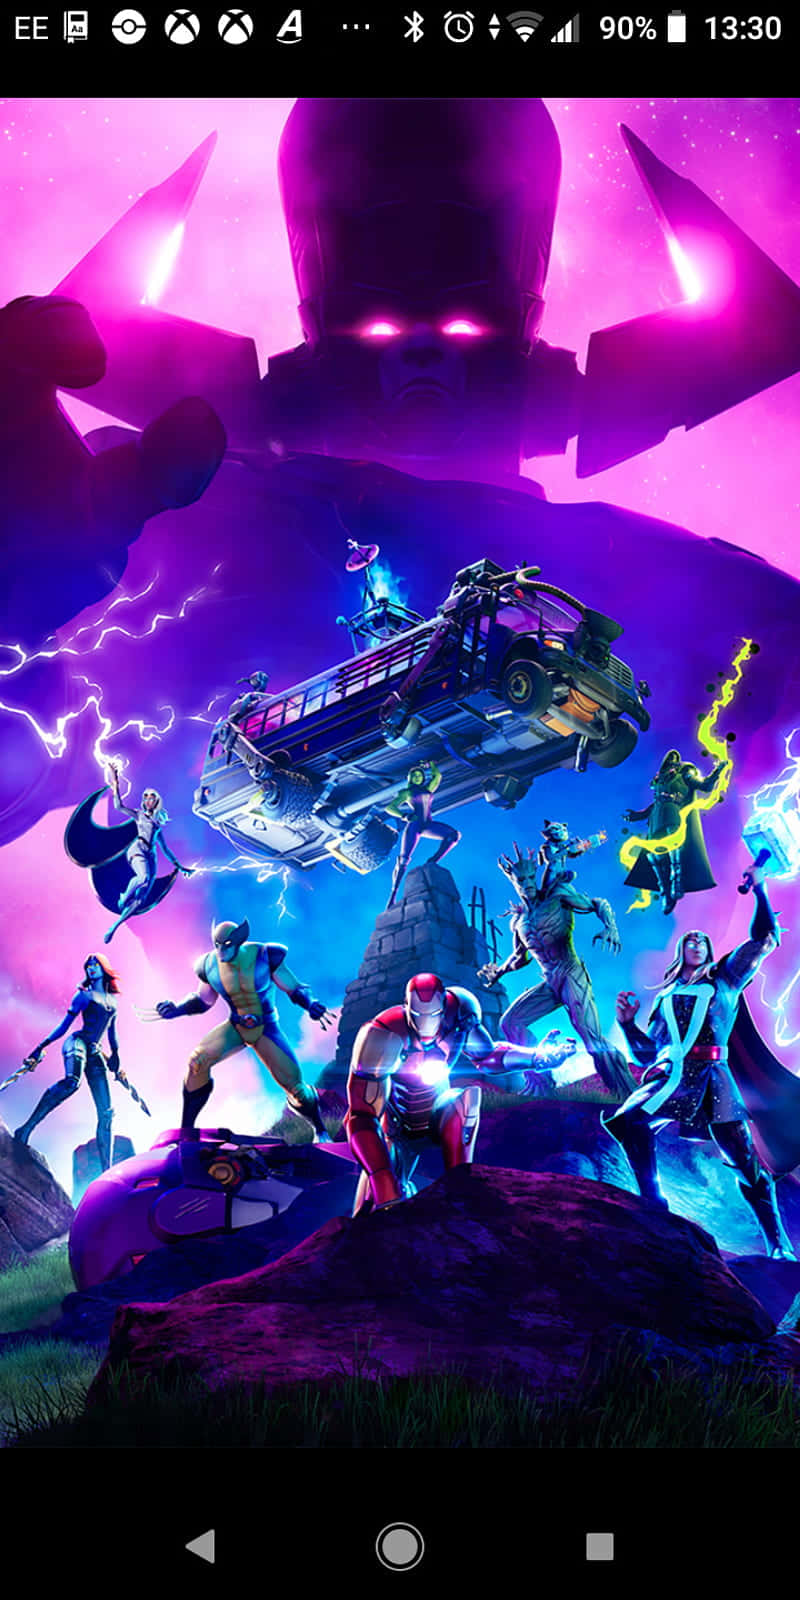 Take to the skies in Fortnite Season 4 Chapter 2 Wallpaper